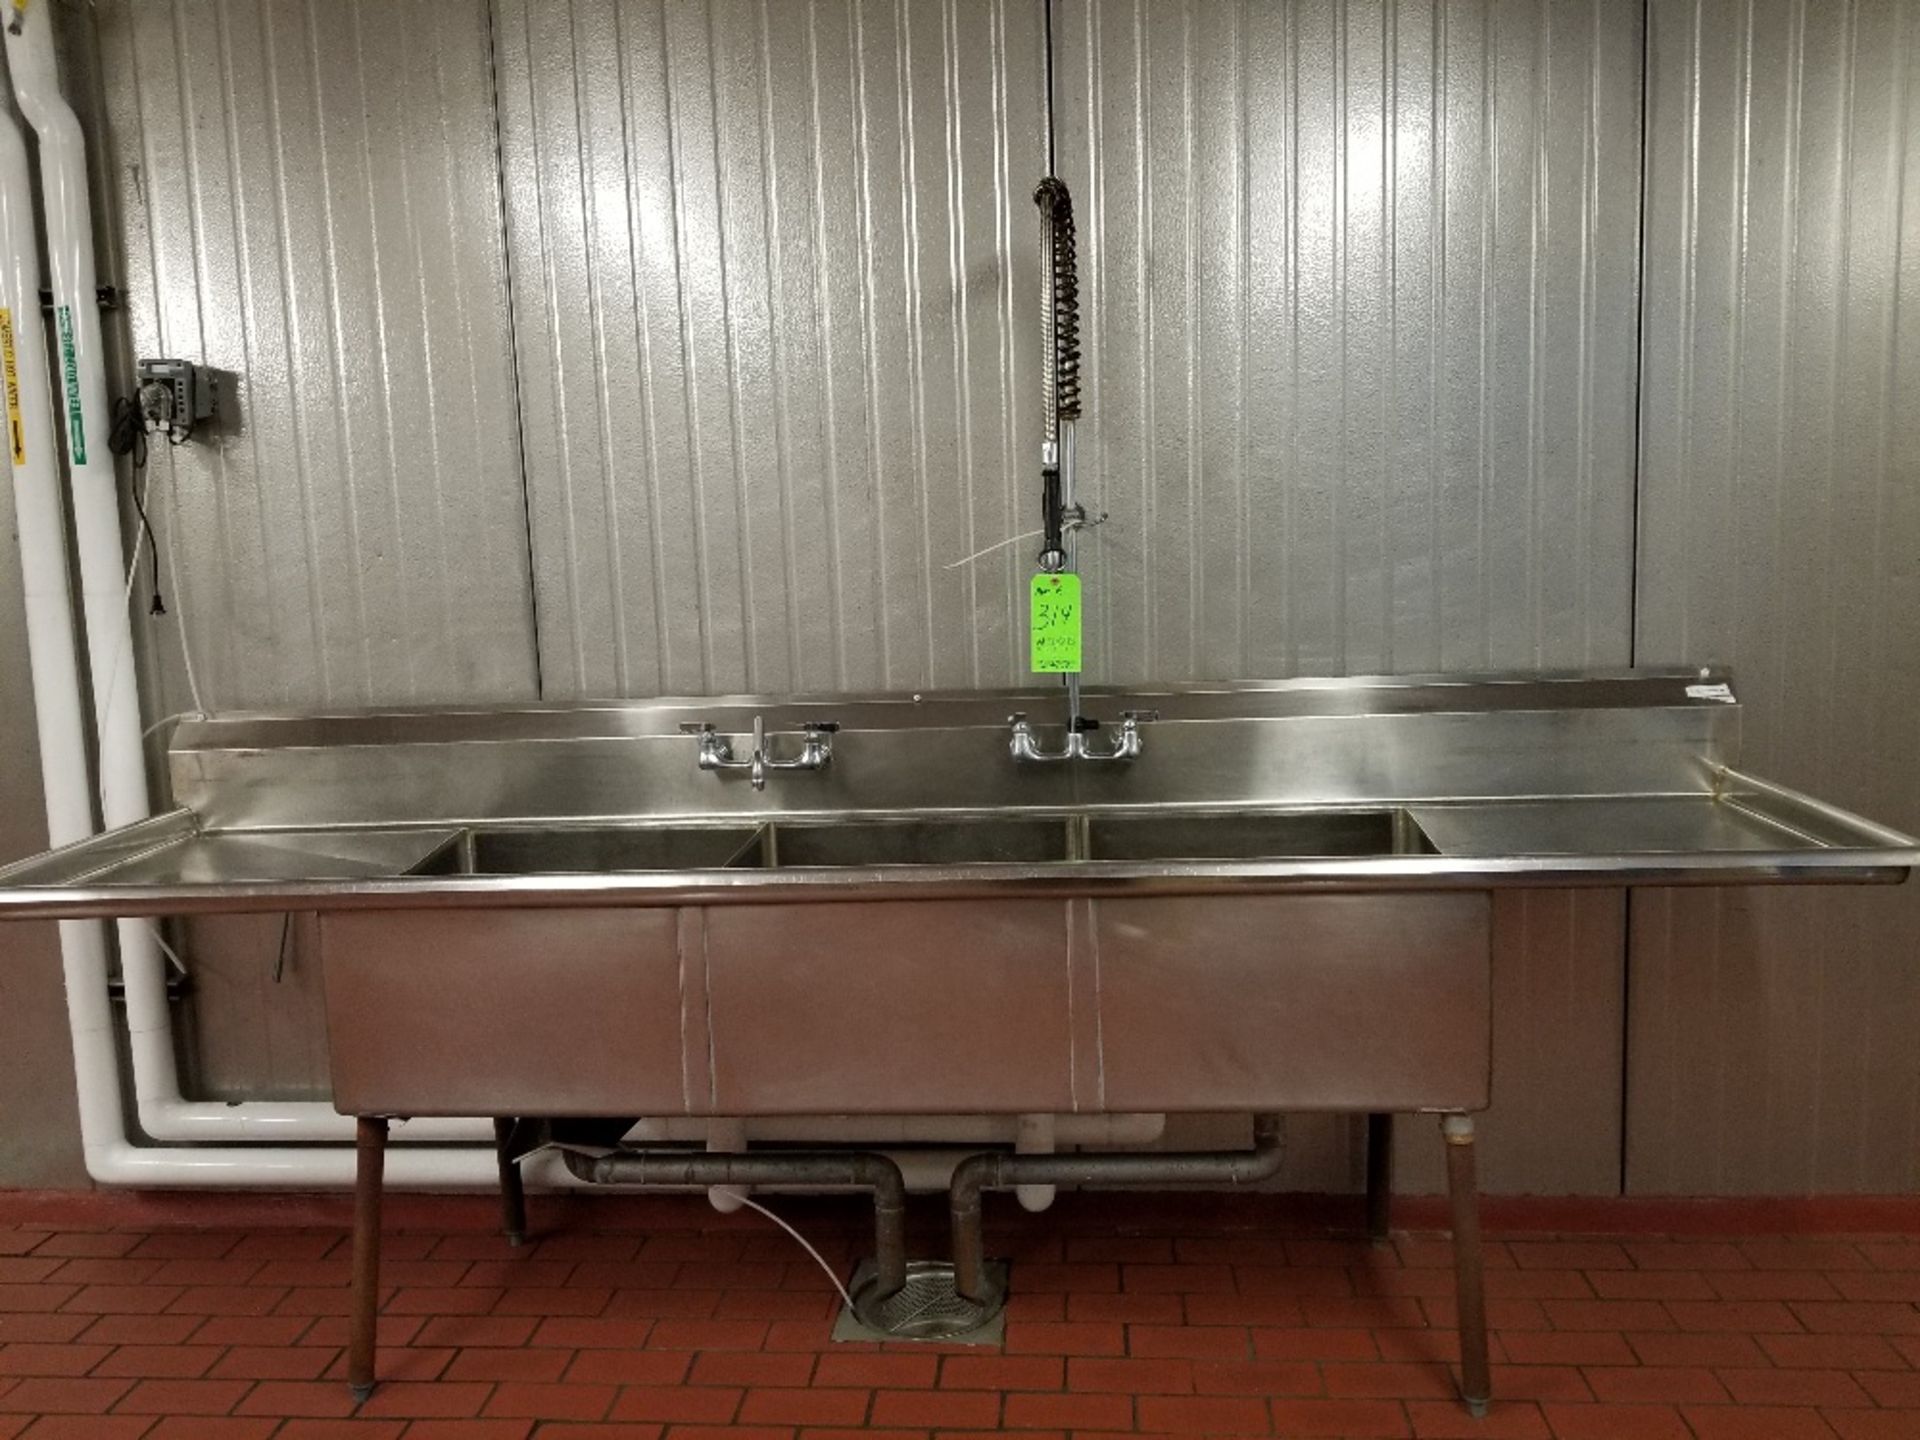 3-Bowl S/S Sinks with (2) Faucets and Sprayer, Overall Dimensions ~6 ft. L x 30" W and ~9 ft. L x - Image 2 of 2